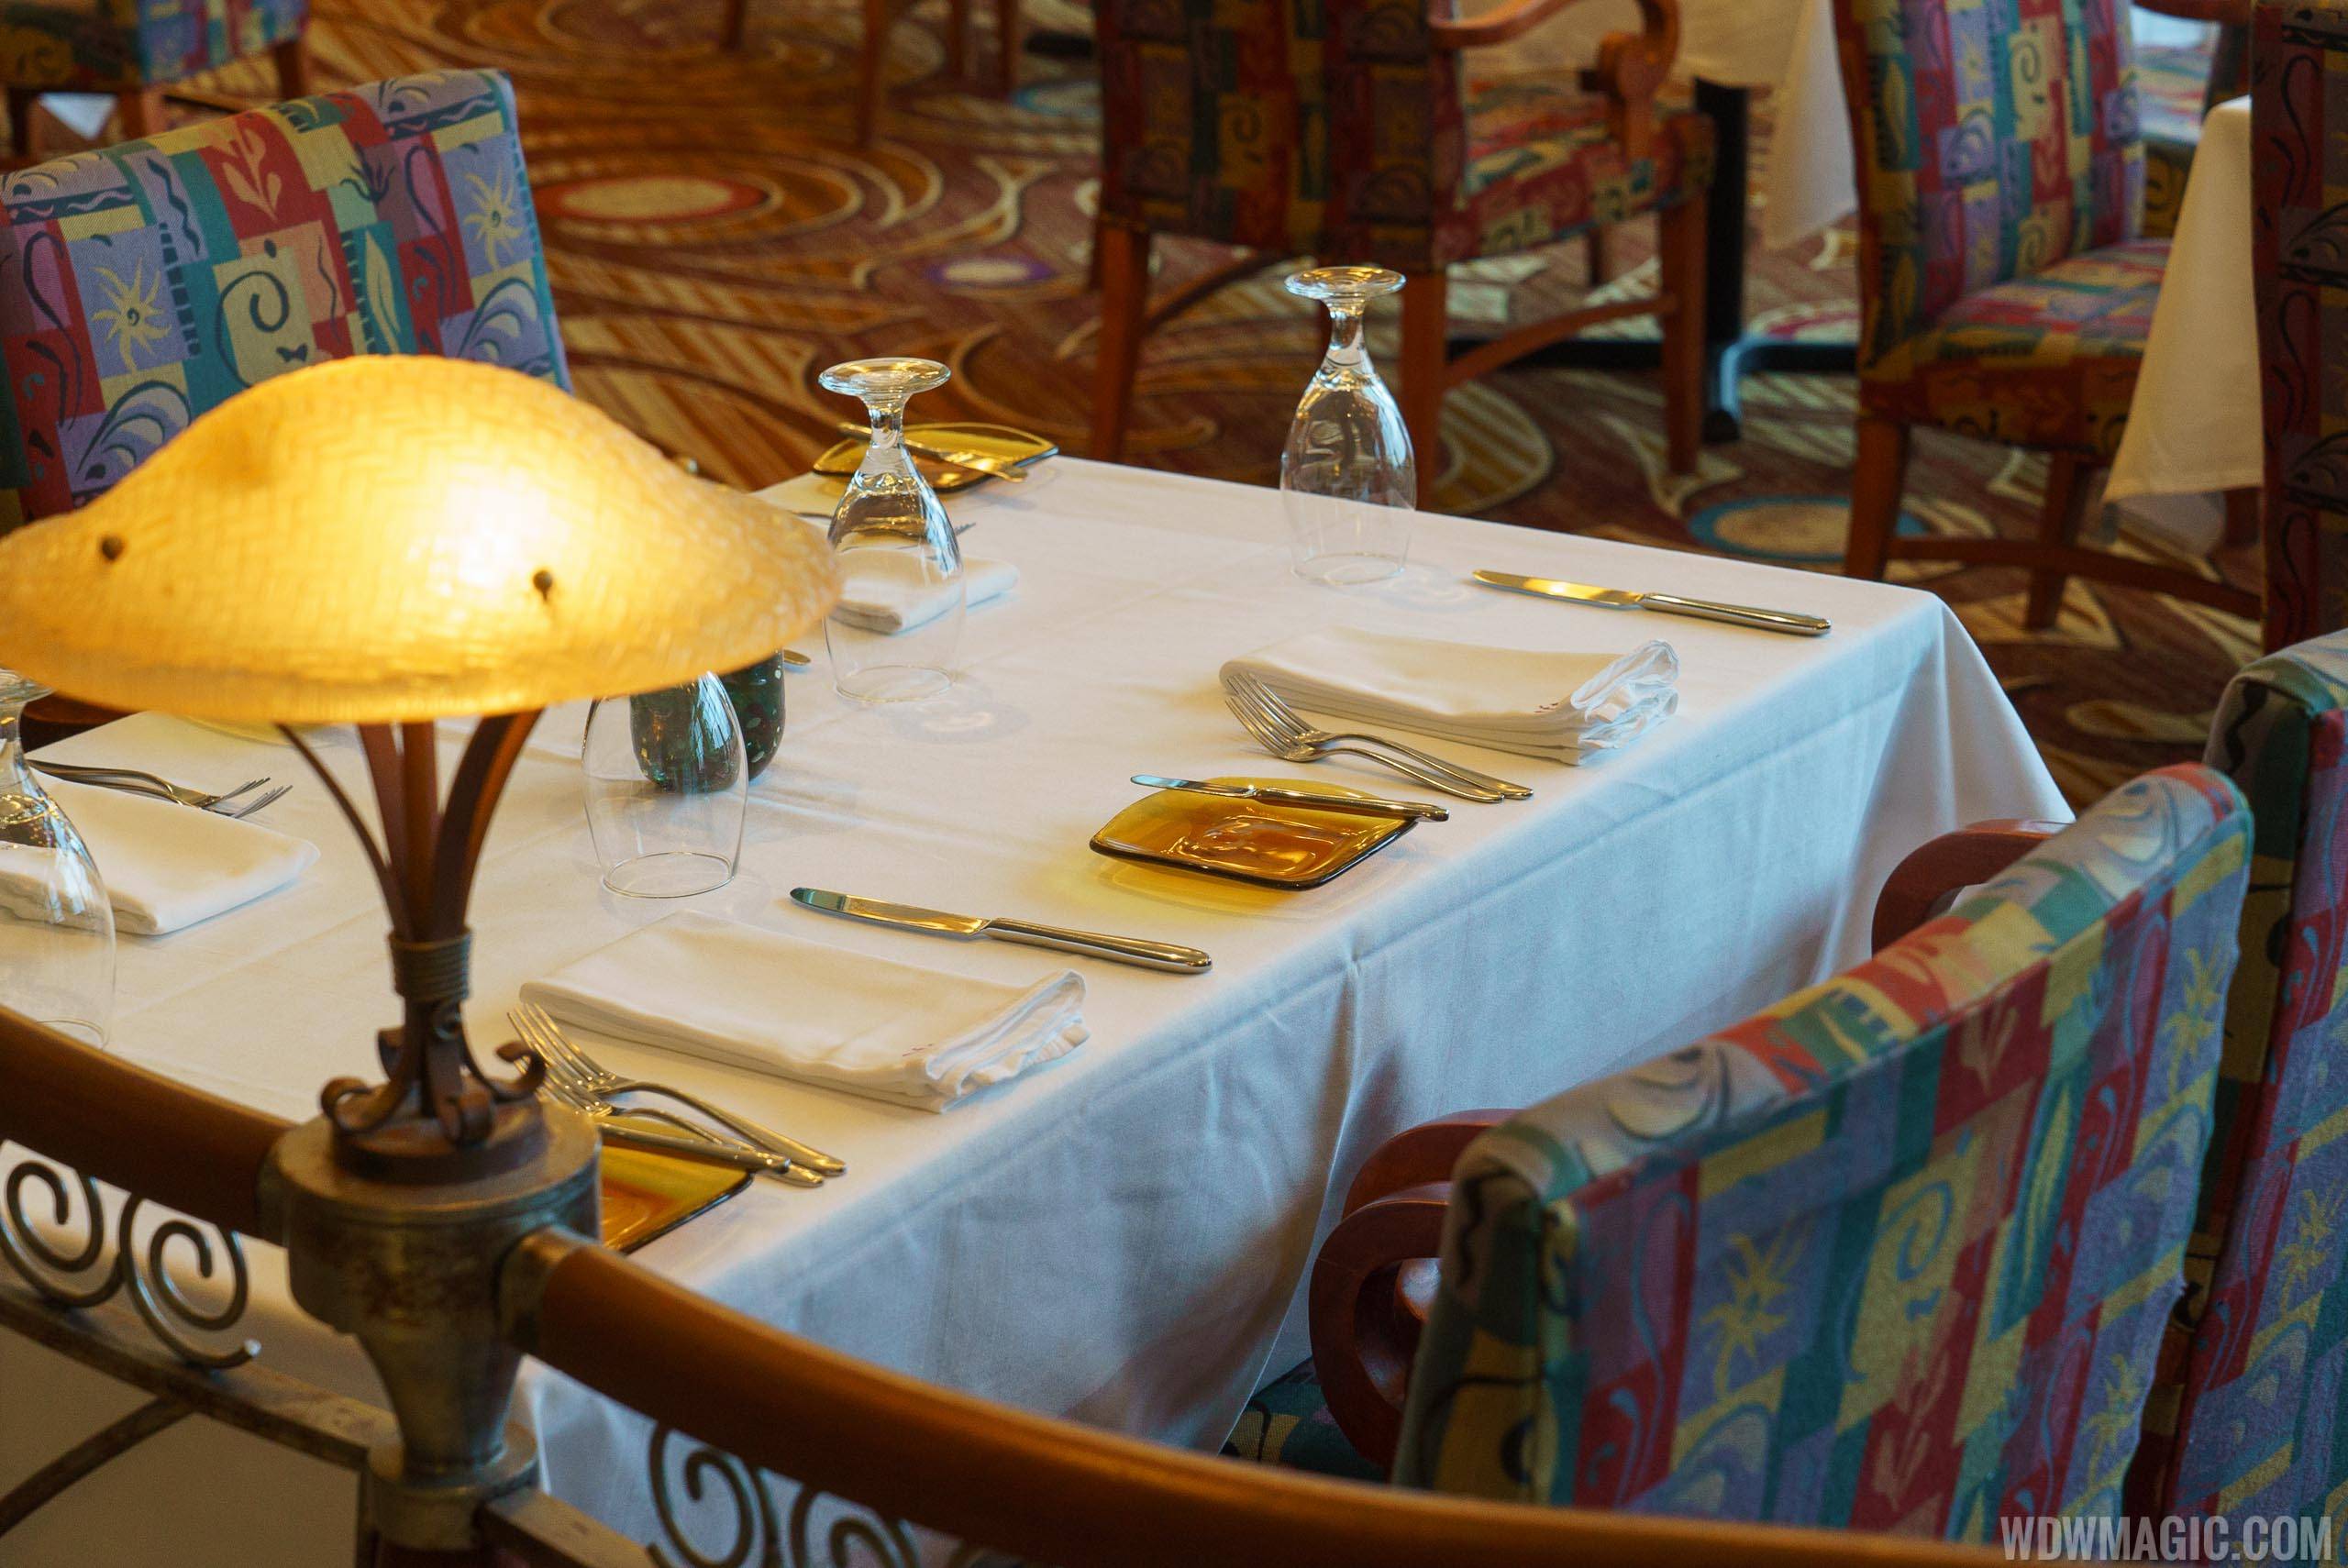 Citricos at Disney's Grand Floridian Resort to offer a Disney Princess dining experience